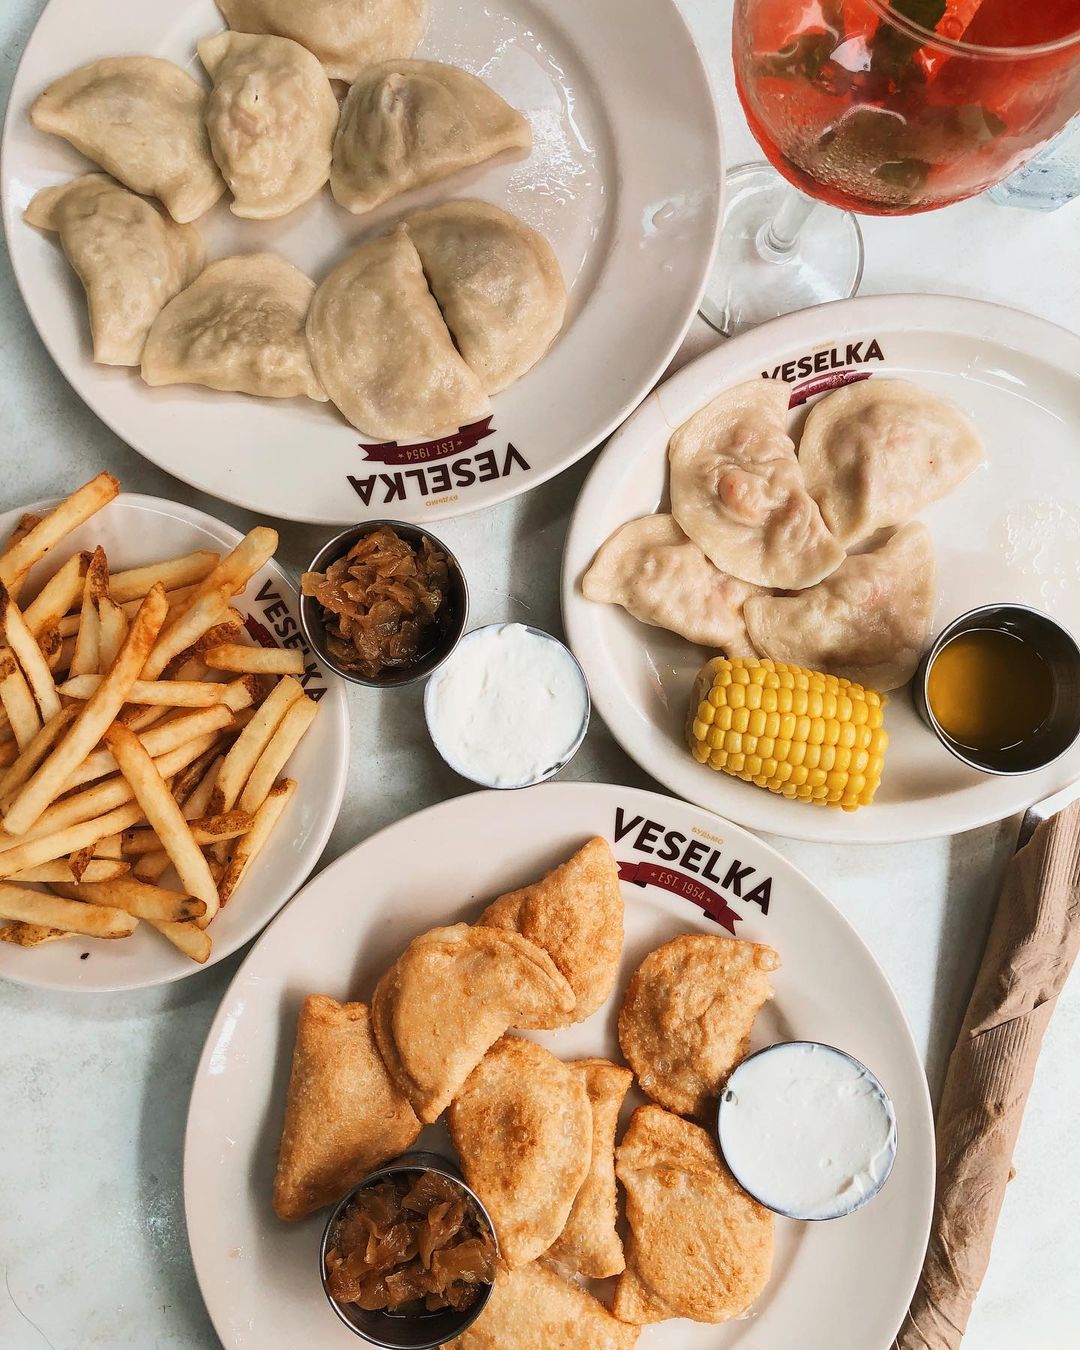 Plates of Food from Veselka Restaurant in the East Village in NYC. Photo by Instagram user @enerianna